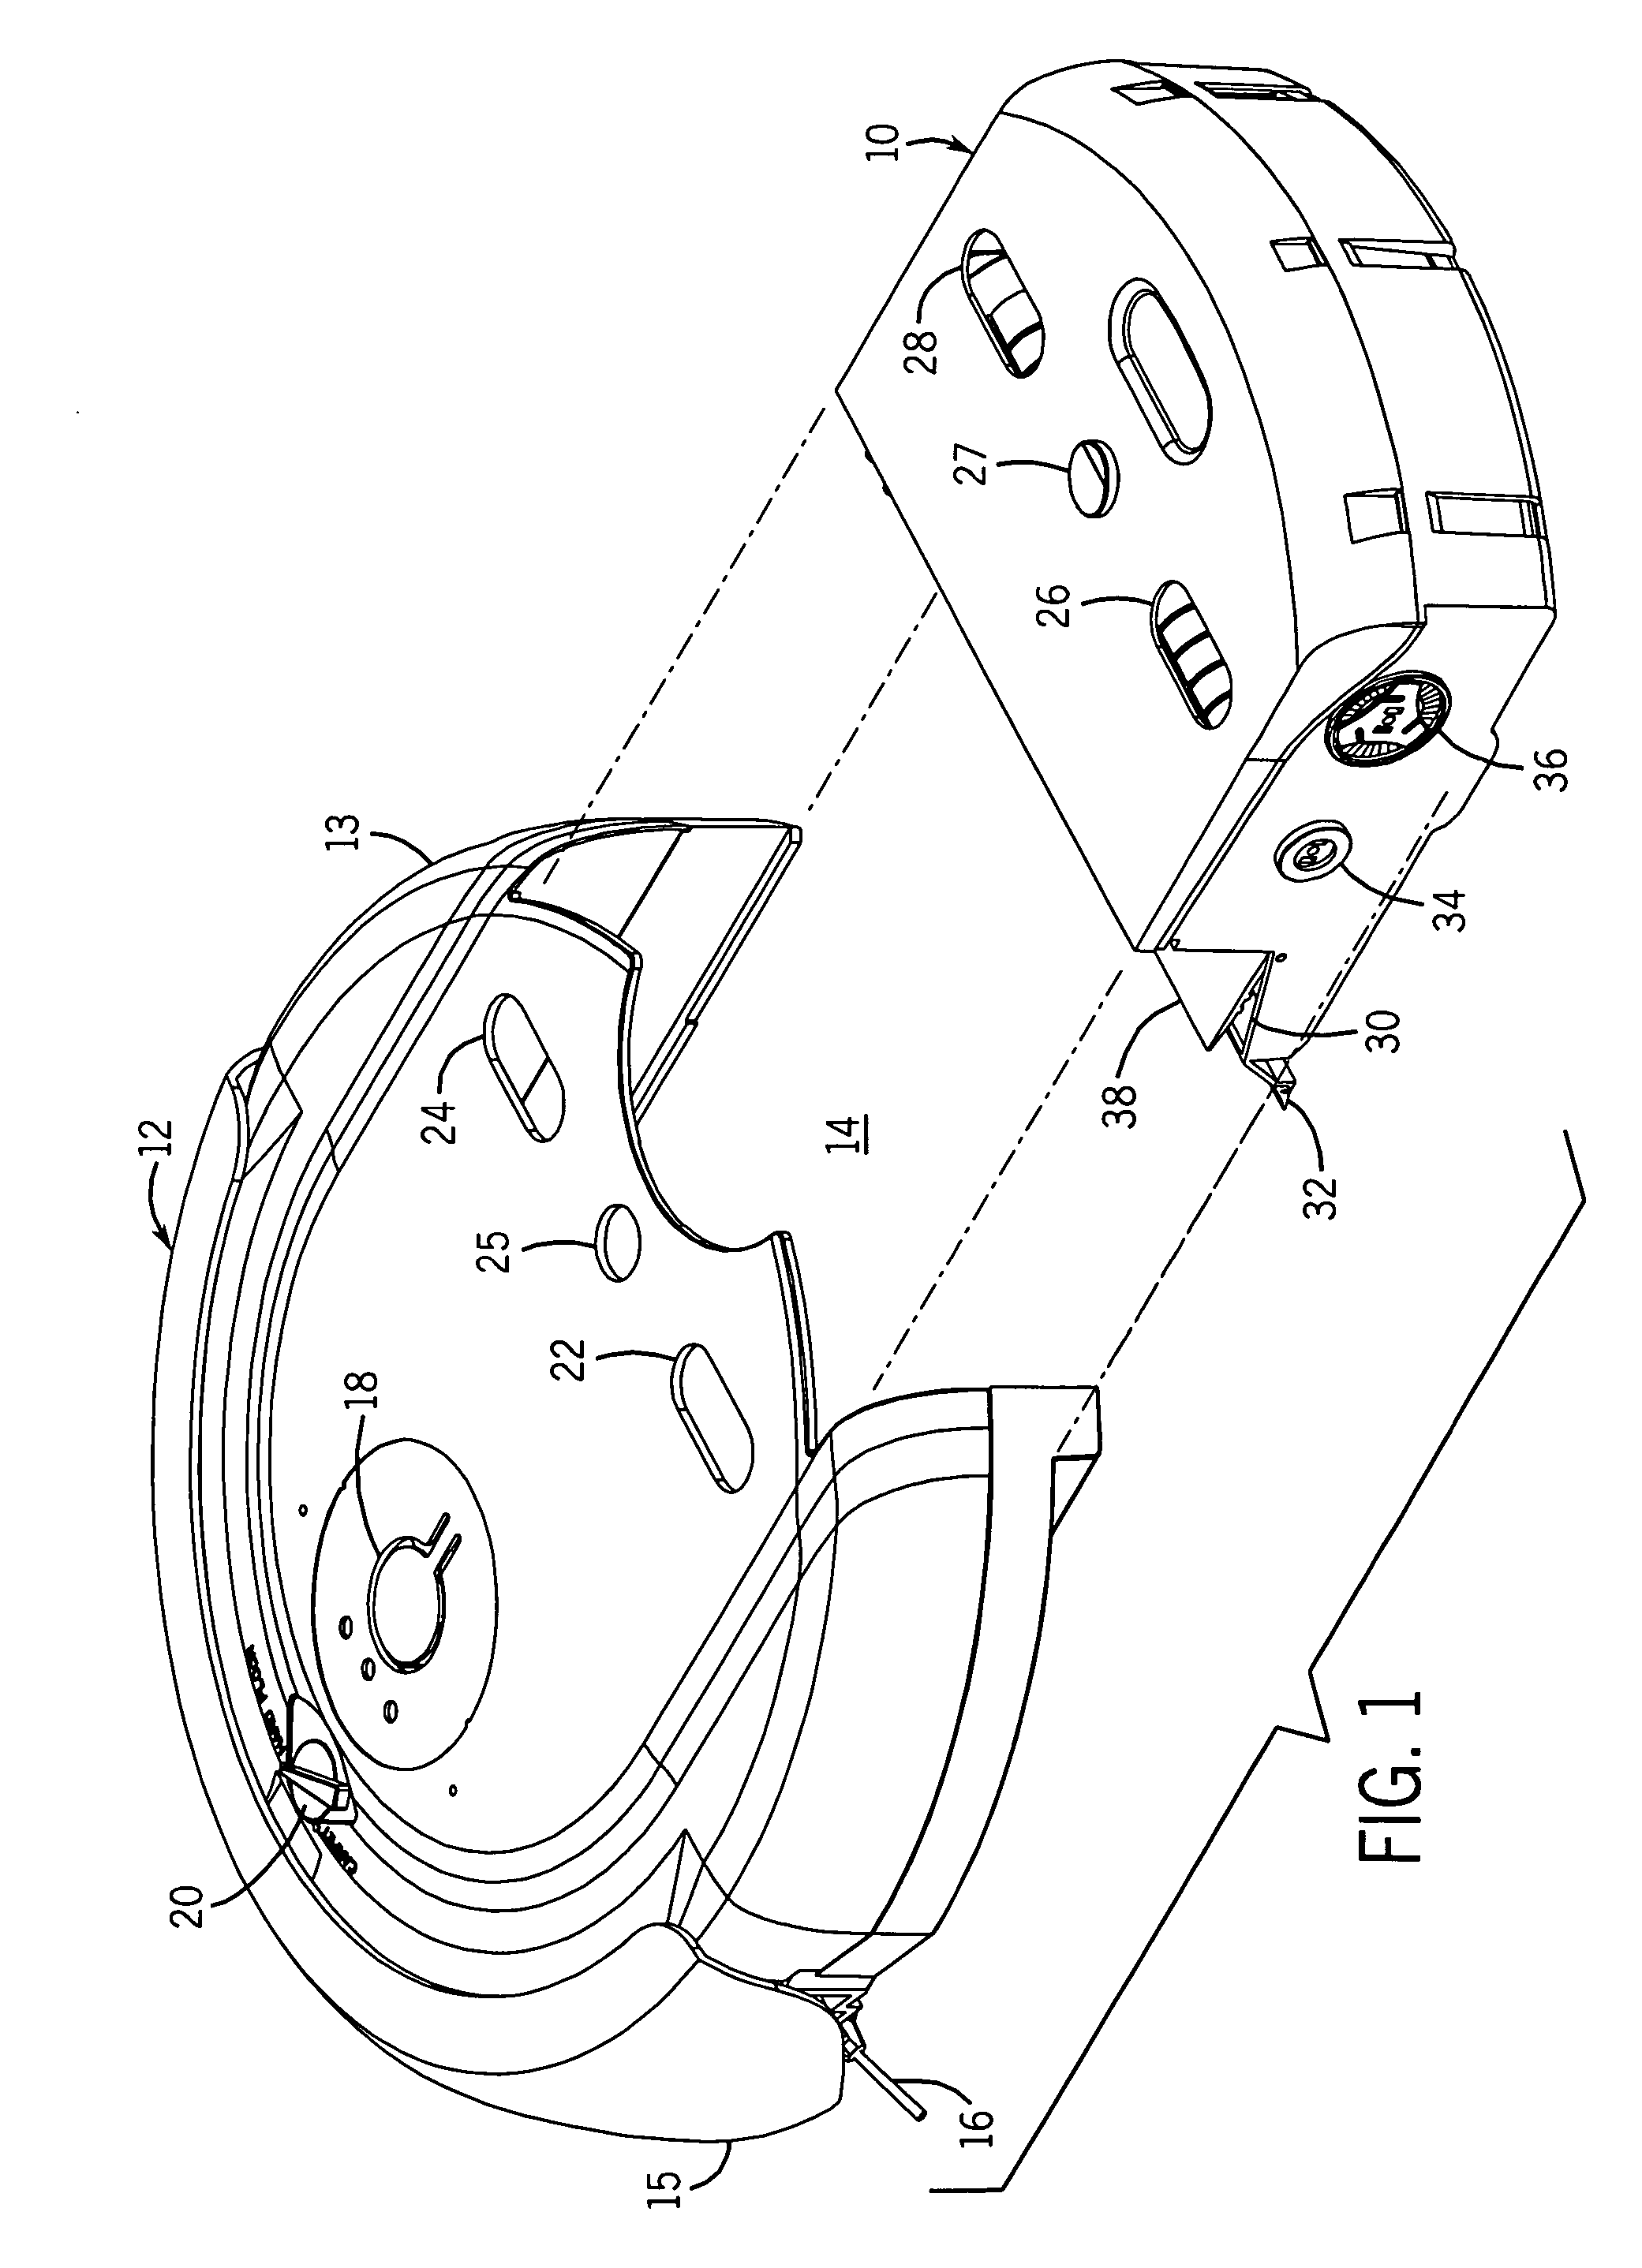 Surface treating device with cartridge-based cleaning system